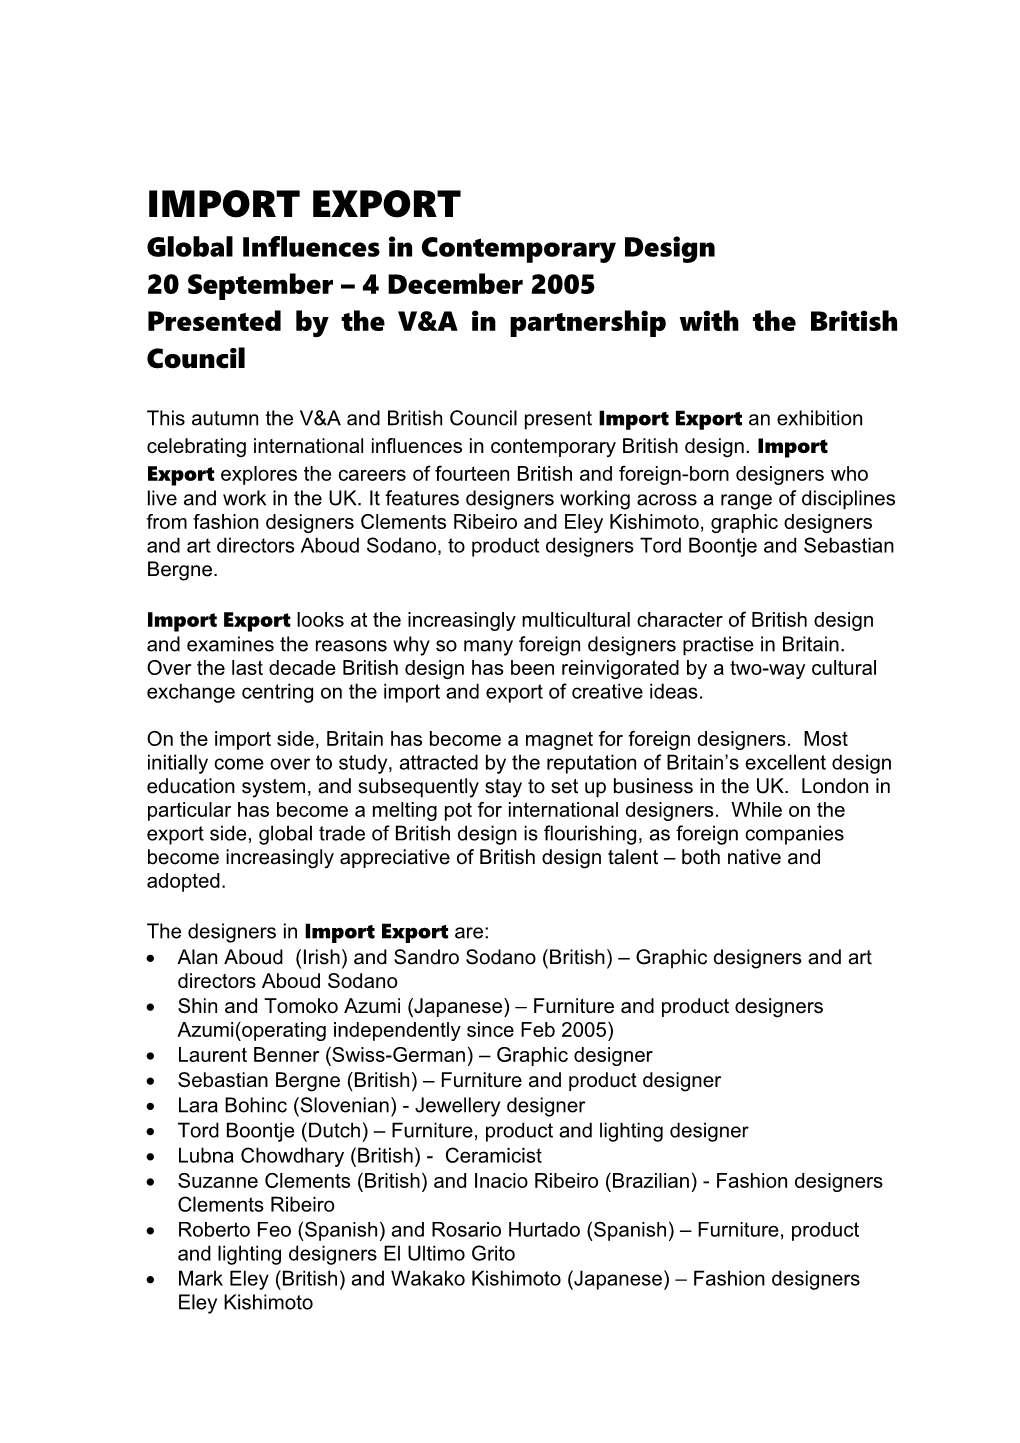 Global Influences in Contemporary Design